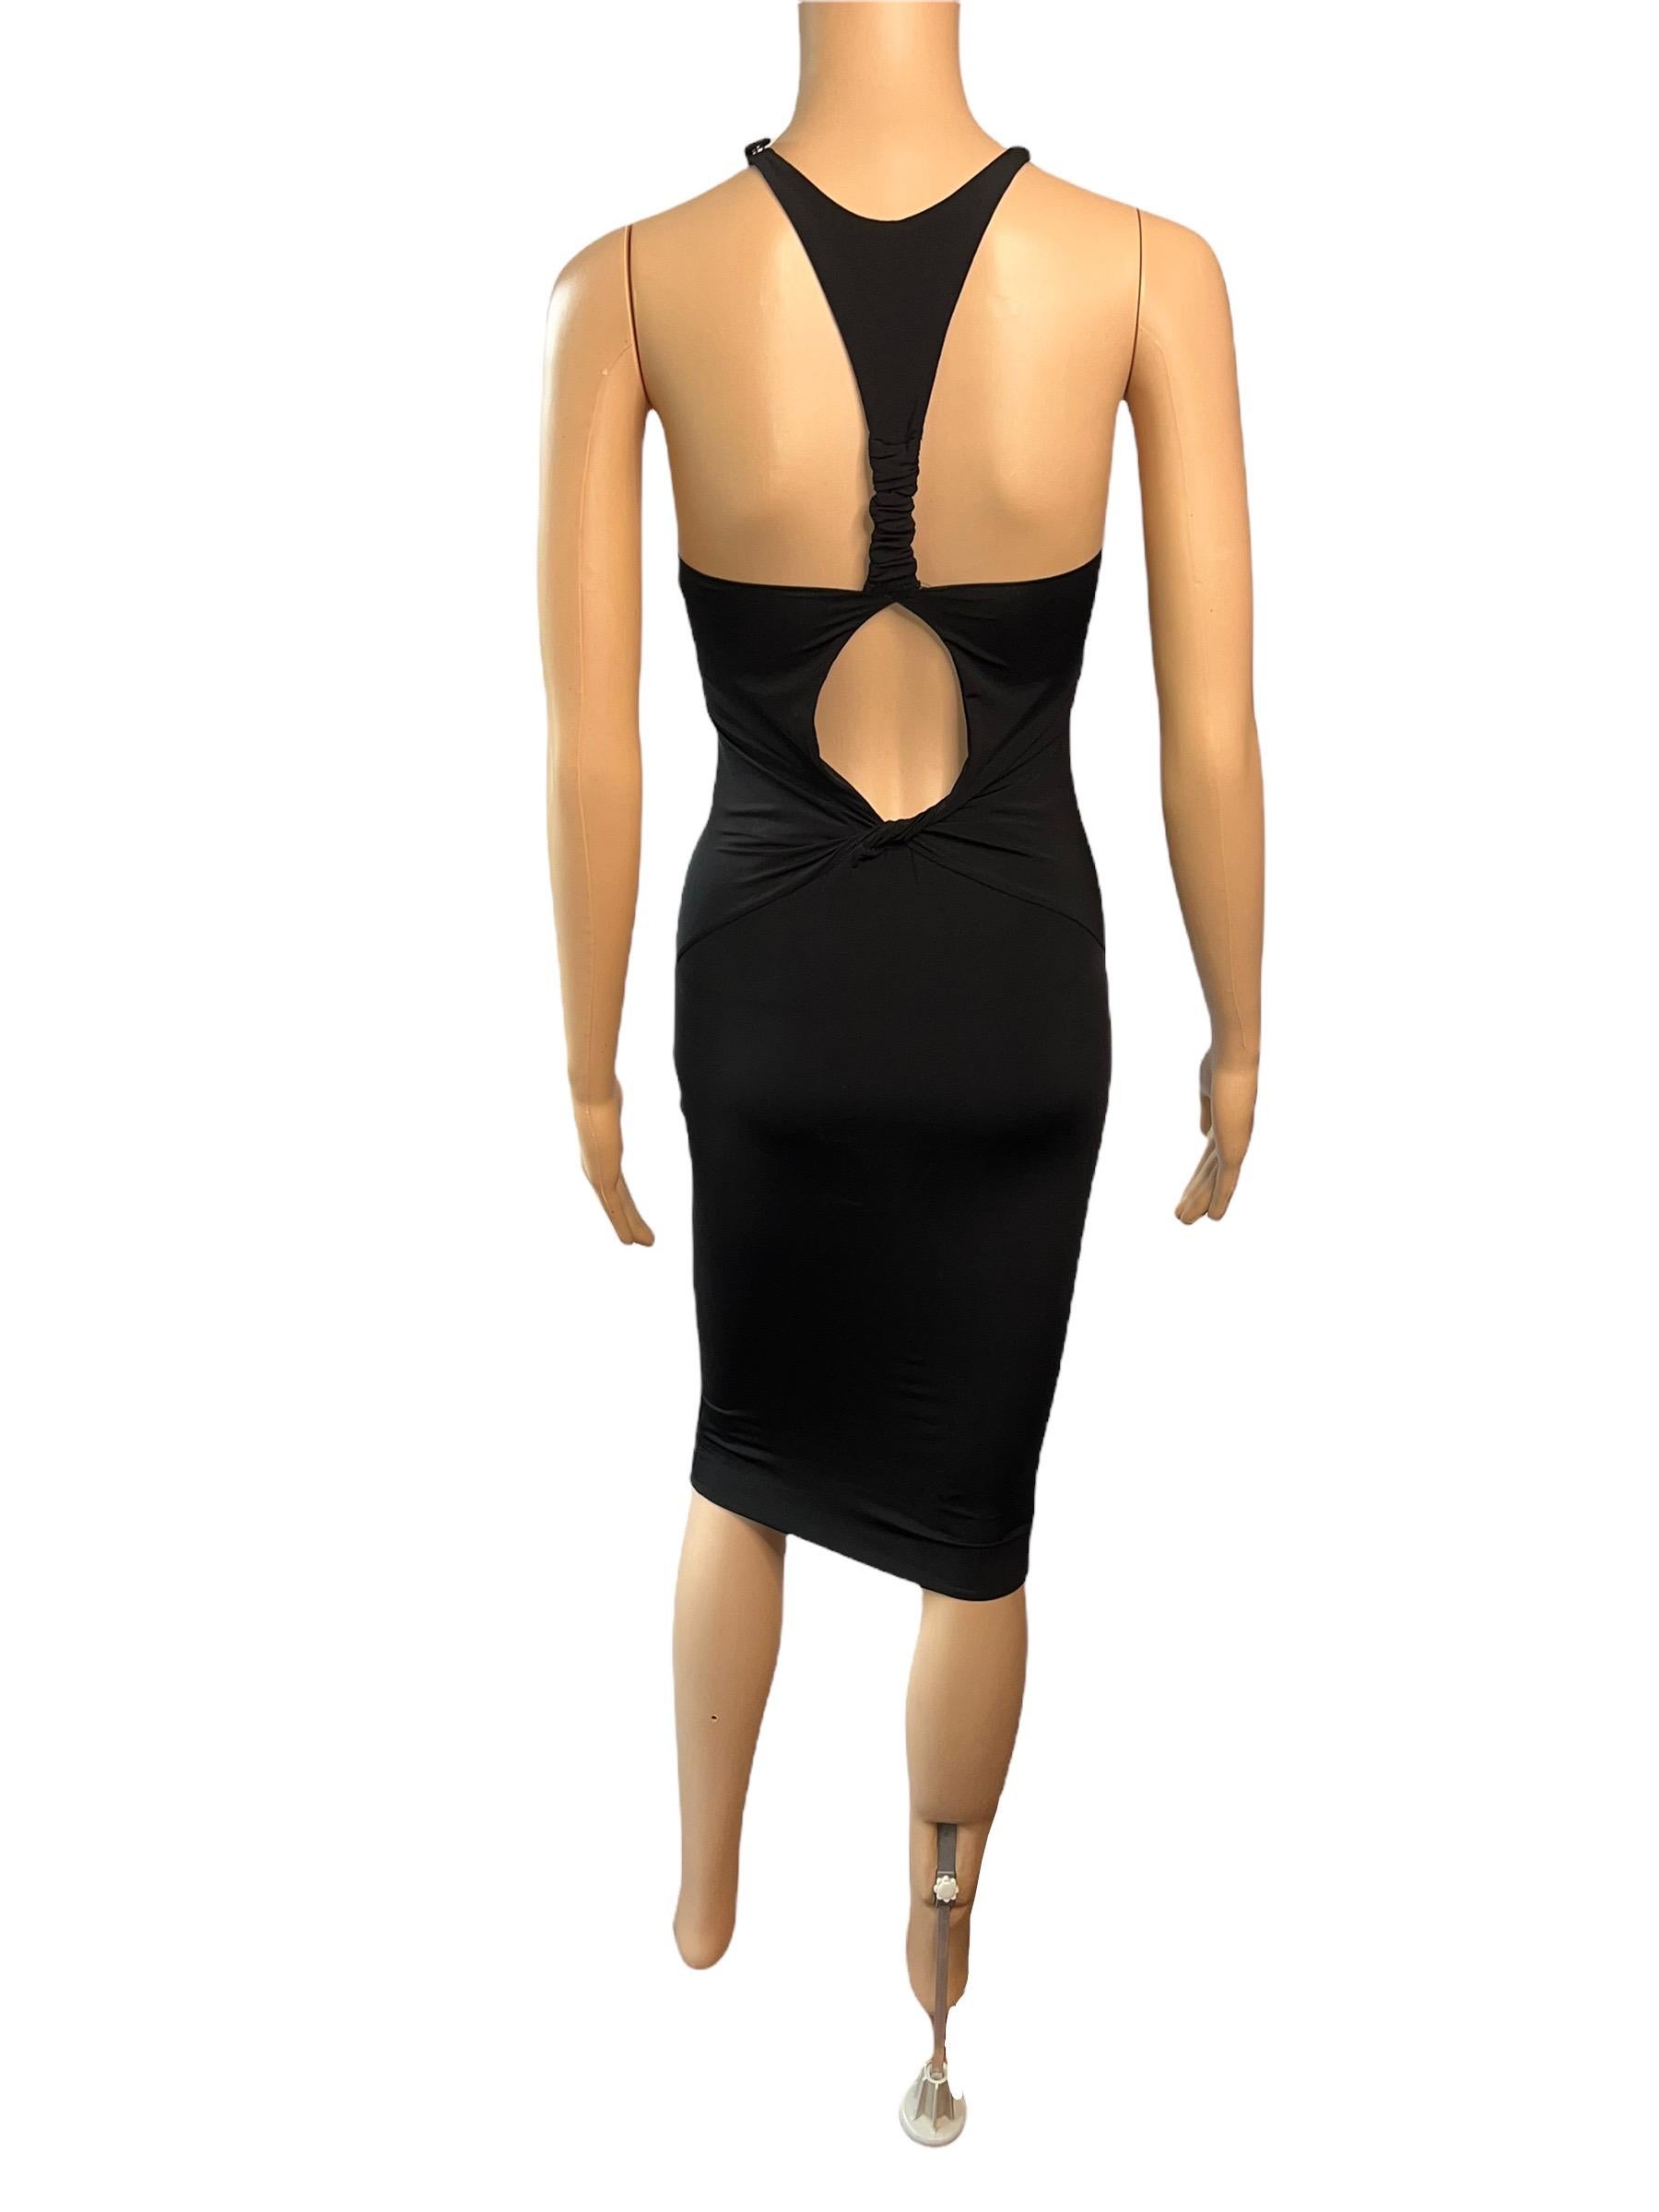 Tom Ford for Gucci F/W 2004 Plunging Cutout Black Evening Dress Size L





